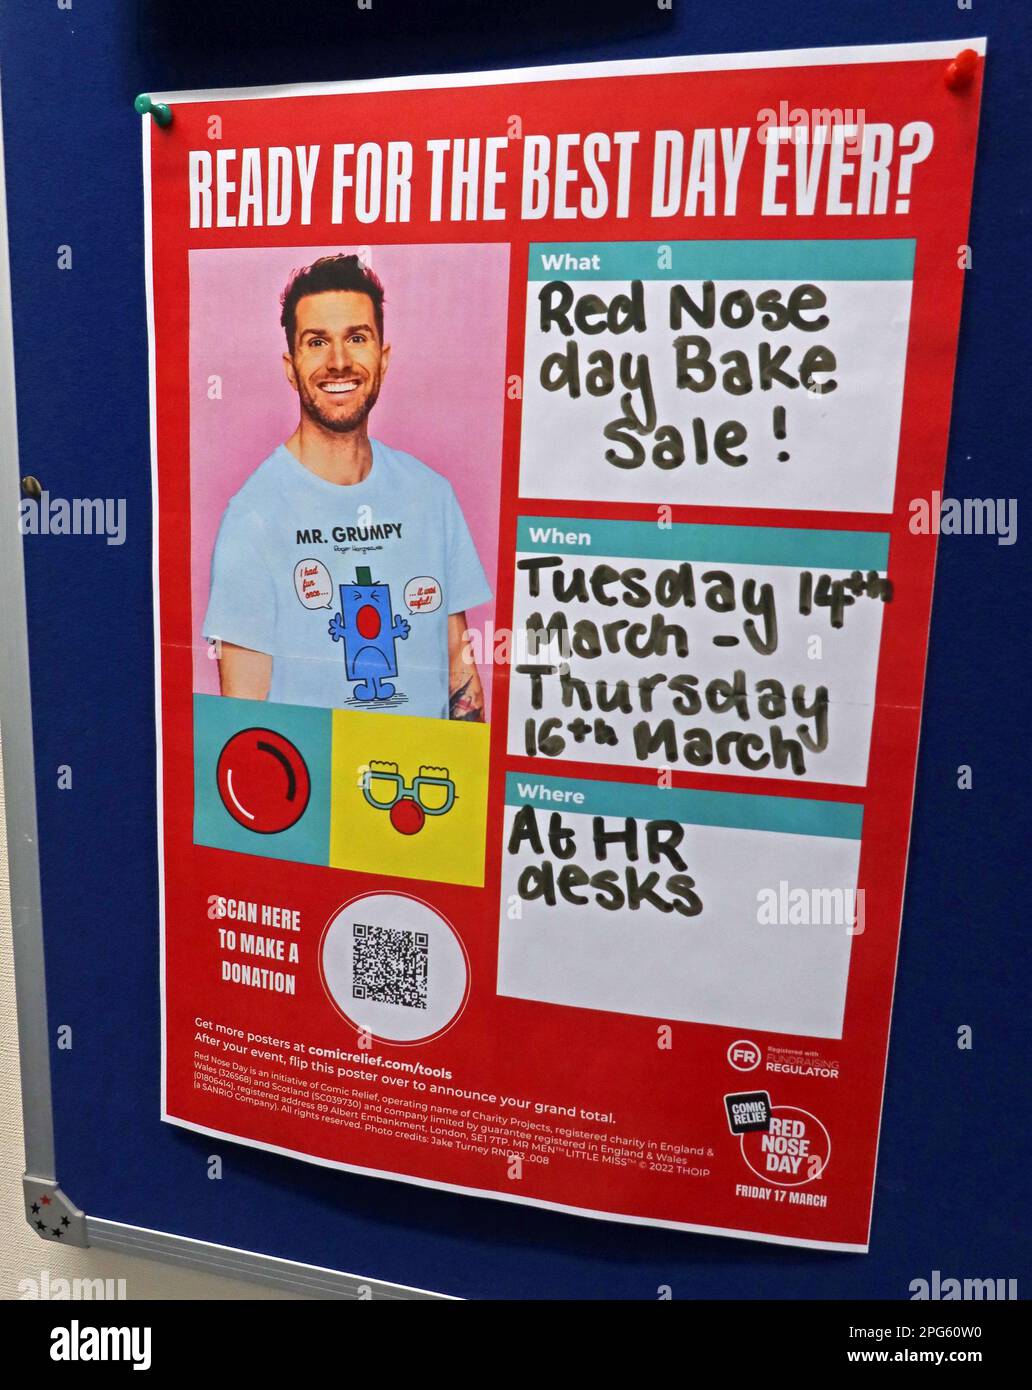 Comic Relief Red Nose Day poster, March, Ready For The Best Day Ever? - Red Nose Bake Sale, at a workplace, make a donation Stock Photo